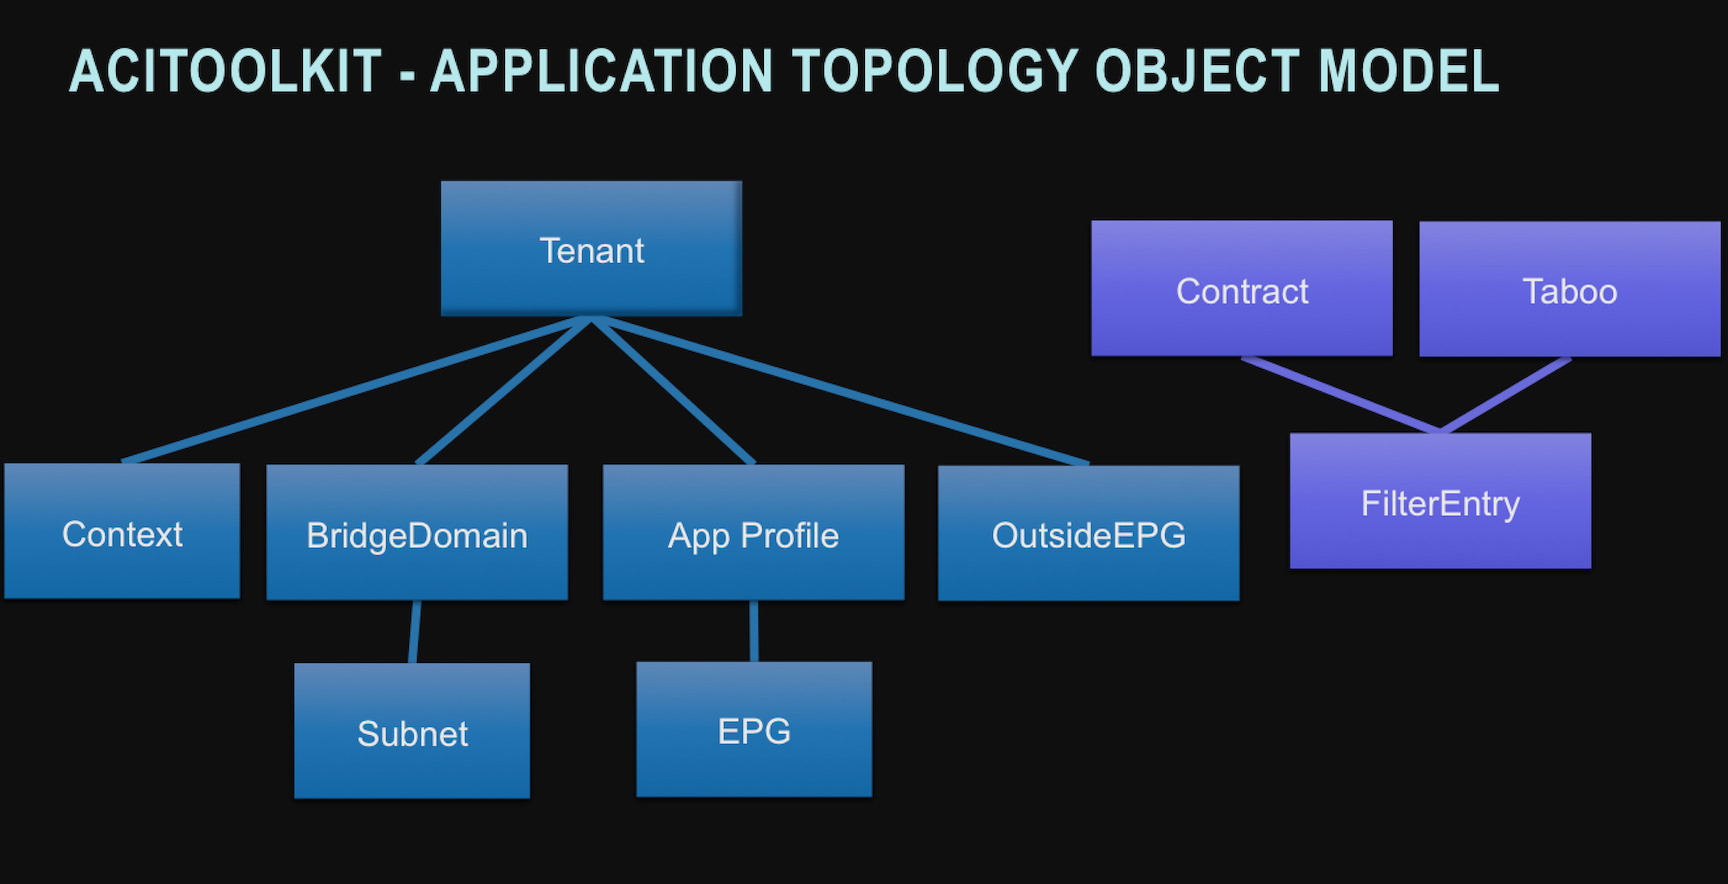 morphx and the application object tree